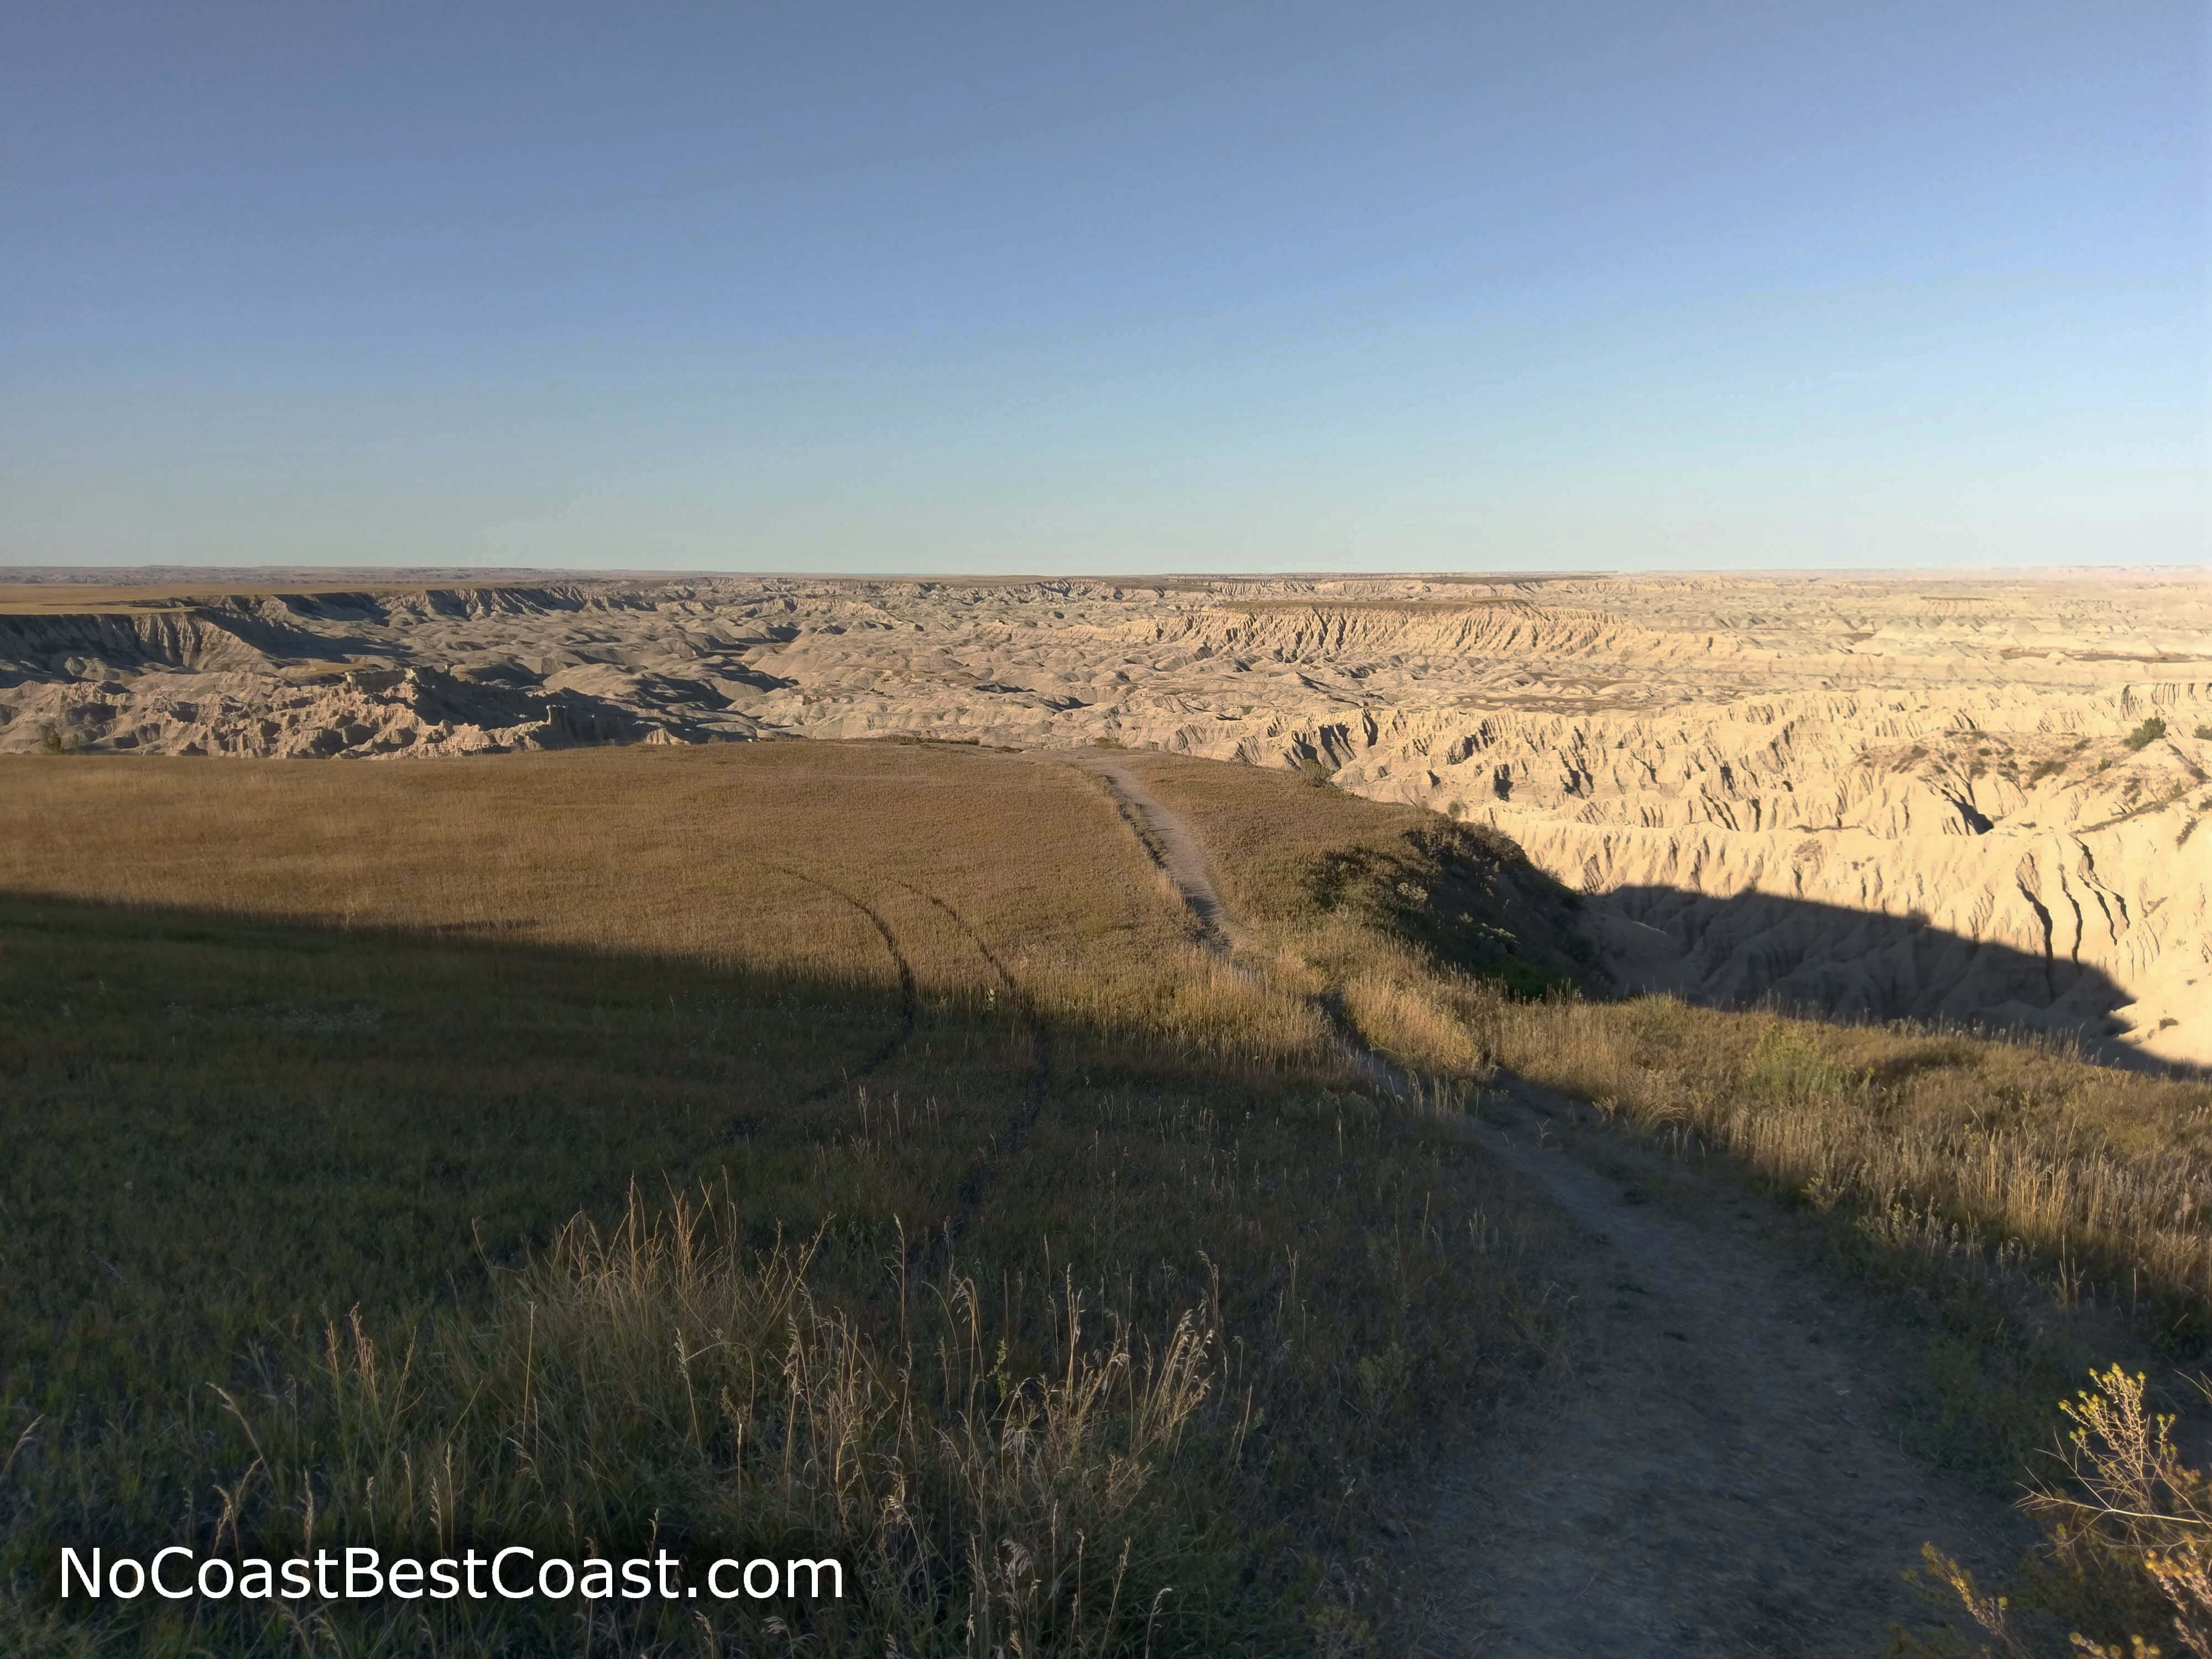 The use-trail leading to the edge of the badlands